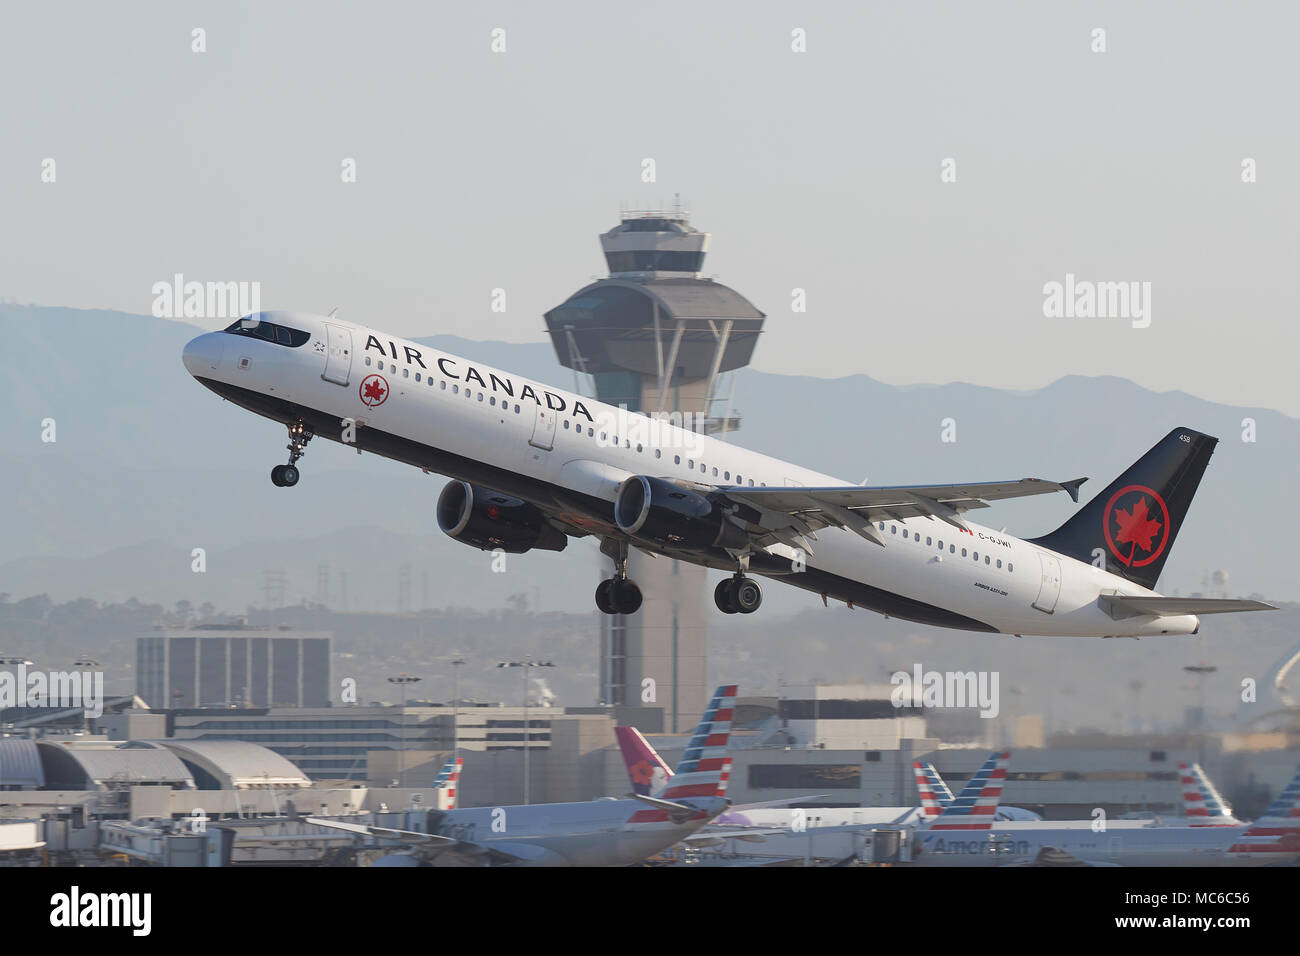 Air Canada Airbus A321 Jet, In The New Livery, Taking Off From Los Angeles International Airport, LAX. The ATC Control Tower In Background. Stock Photo